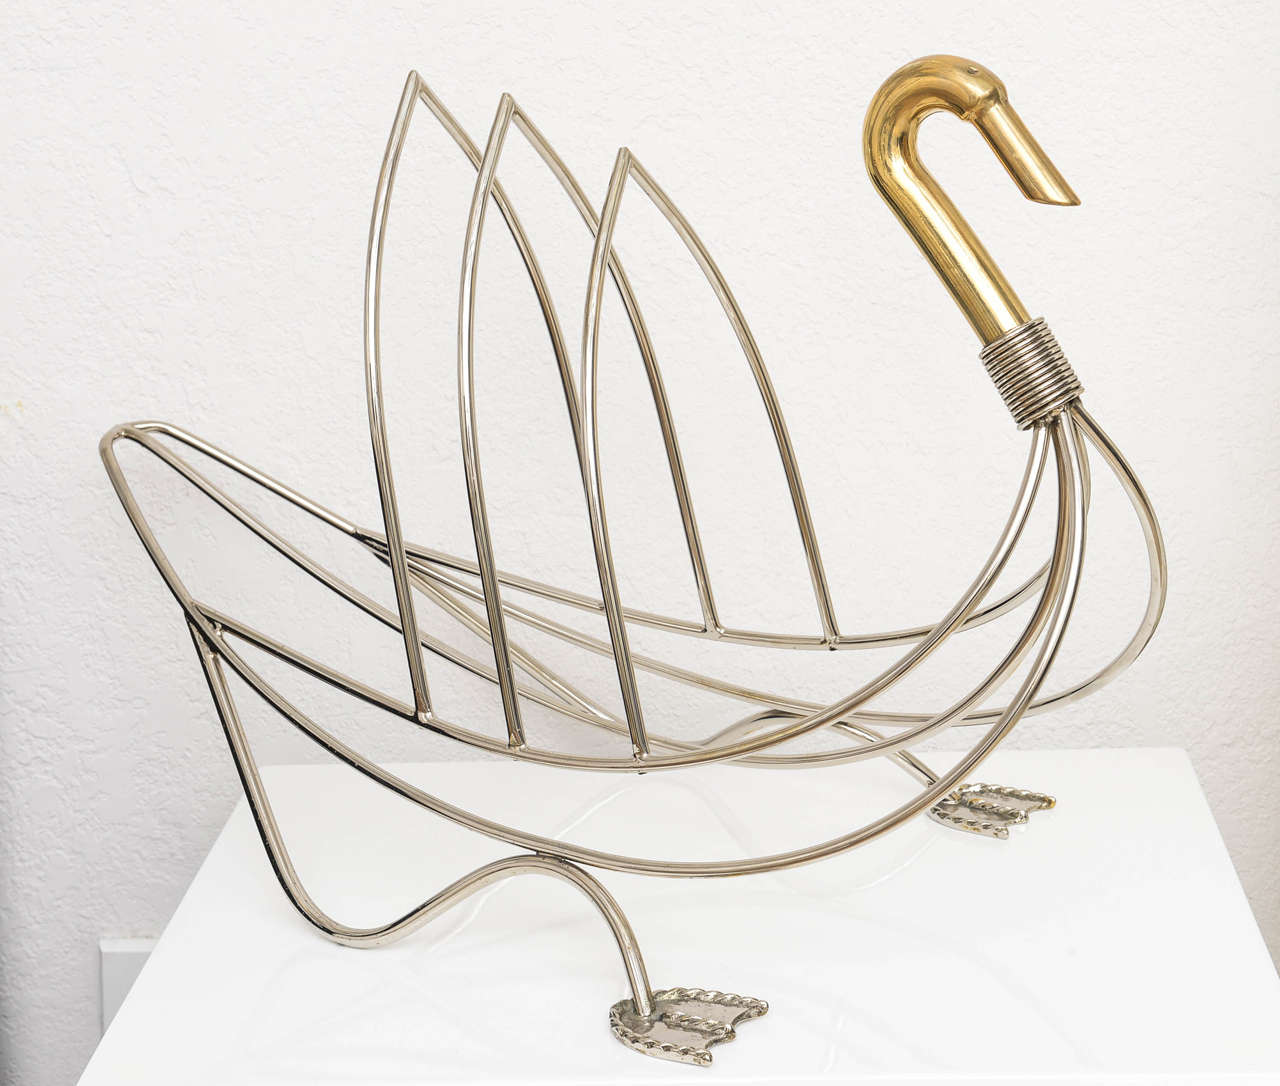 Chrome and brass swan shaped magazine rack.

Please feel free to contact us directly for a shipping quote or any additional information by clicking 